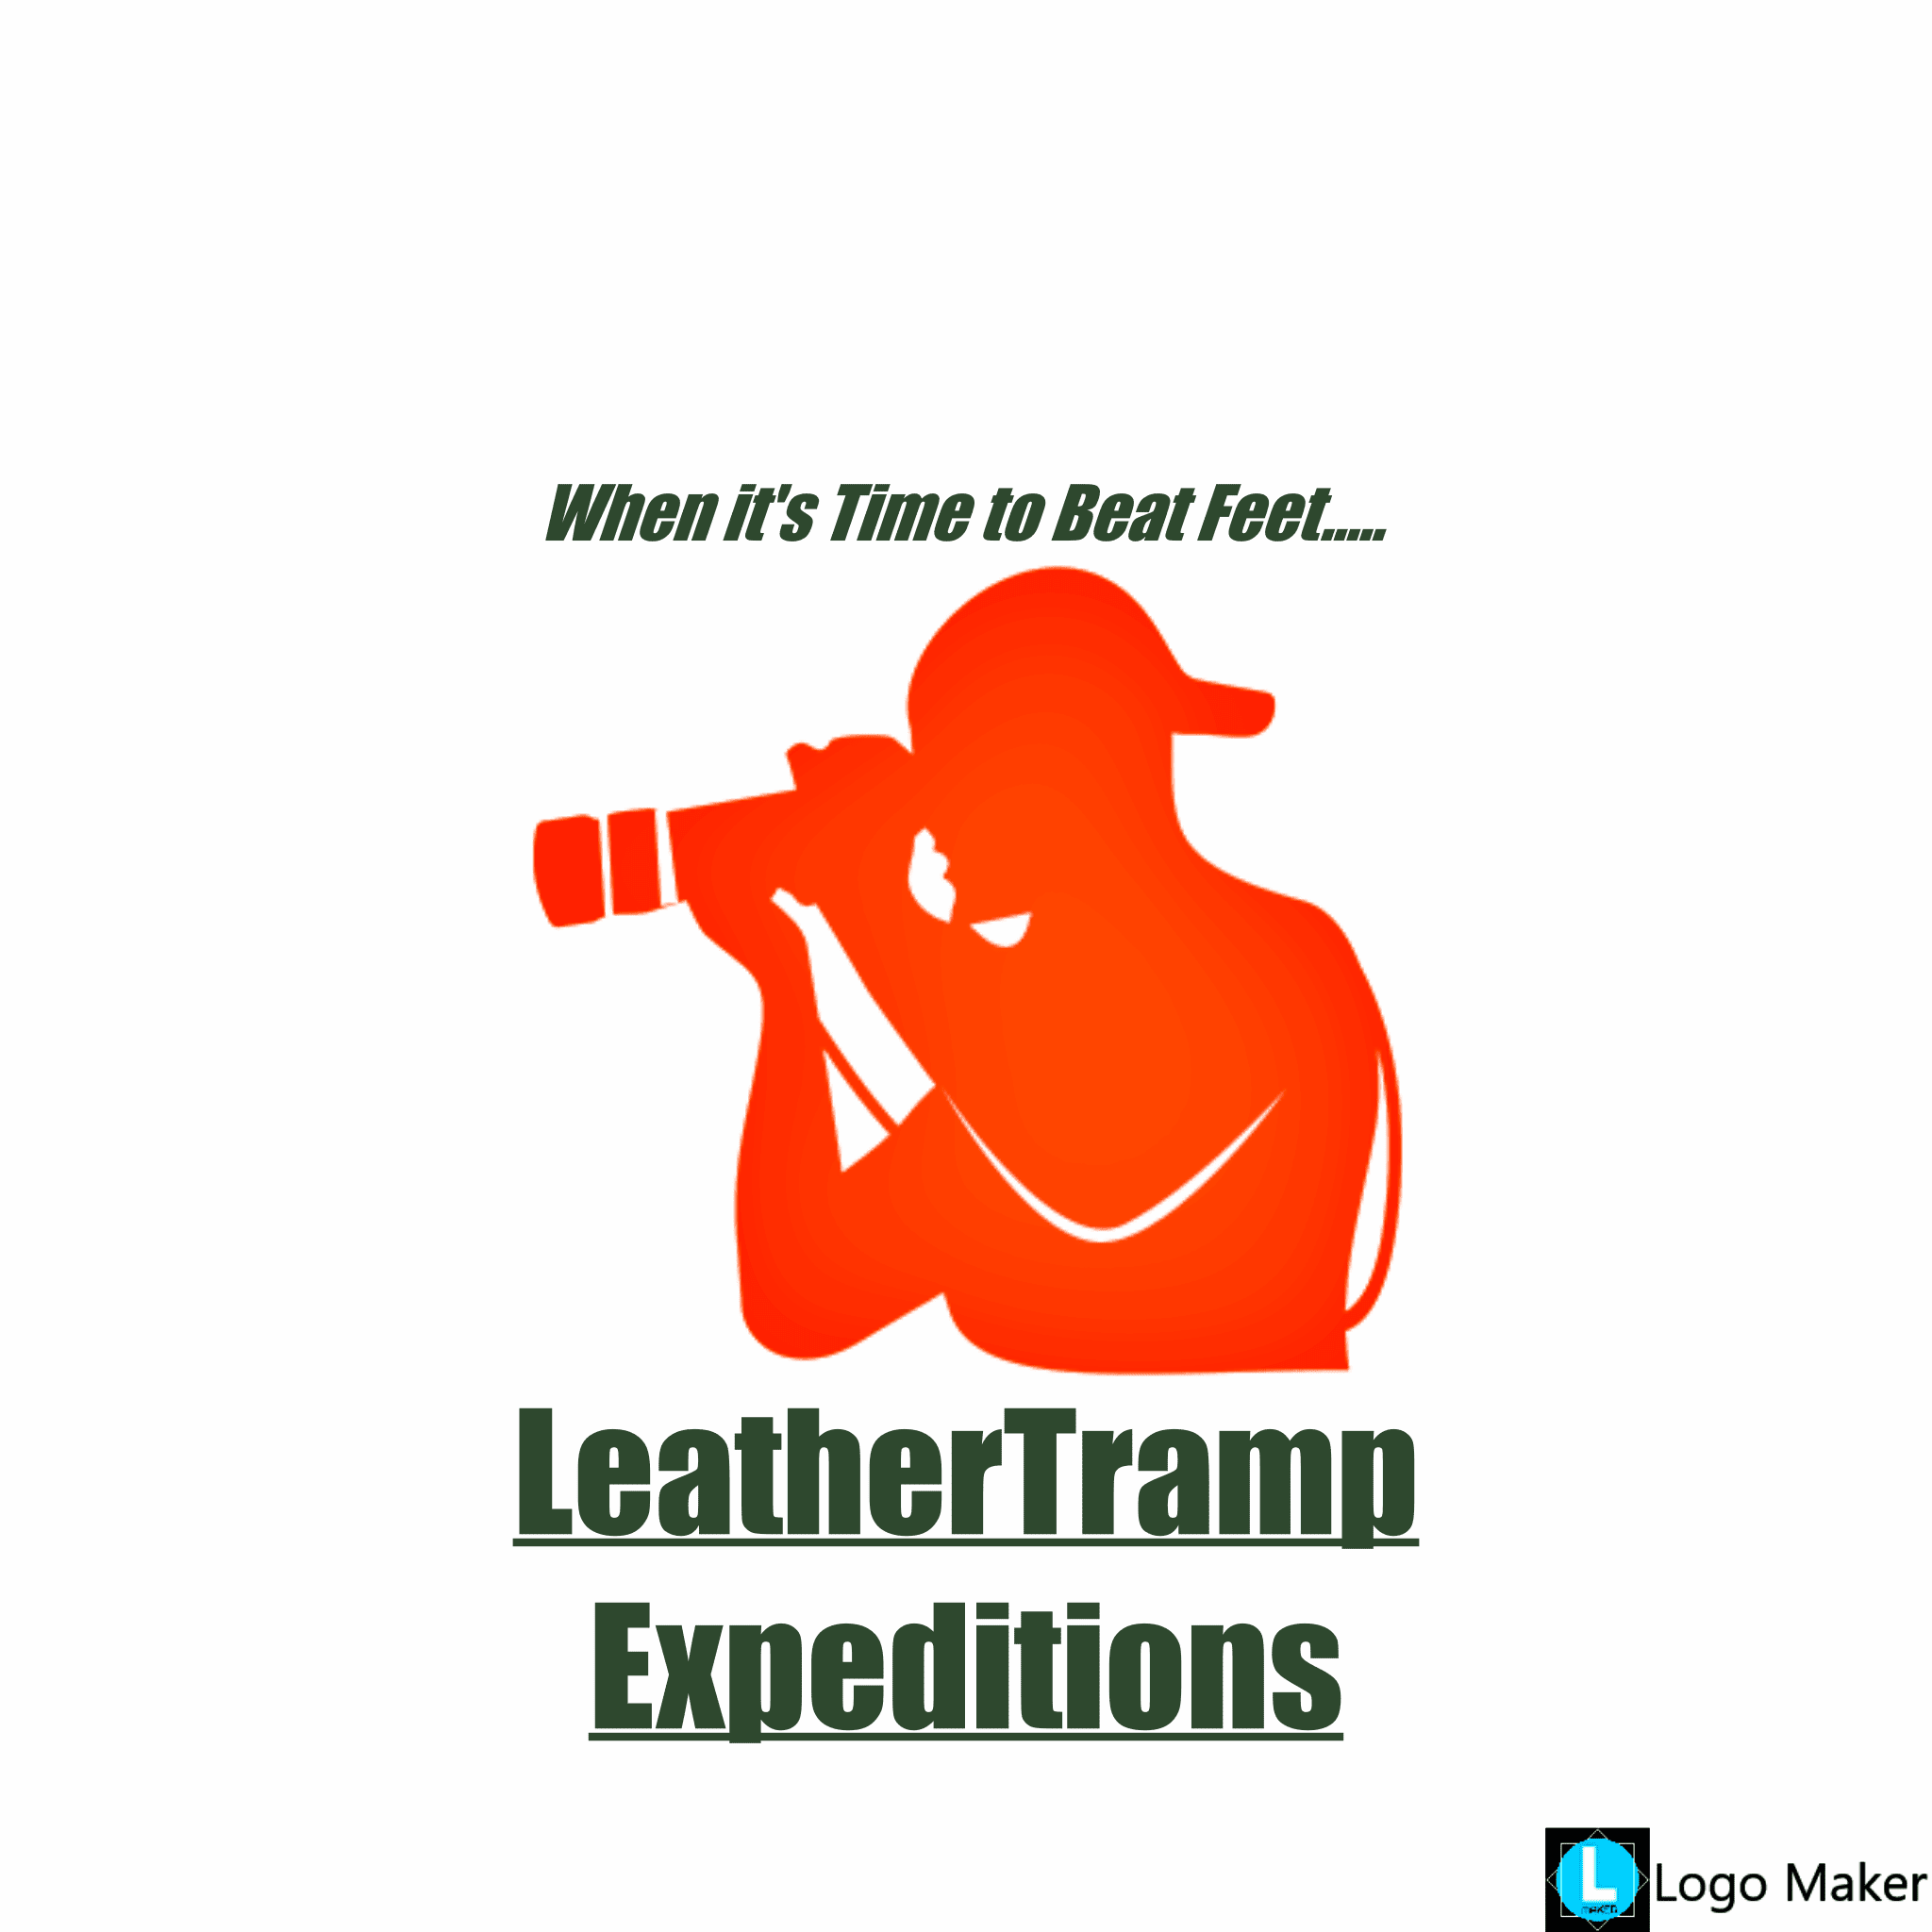 Leathertramp Expeditions